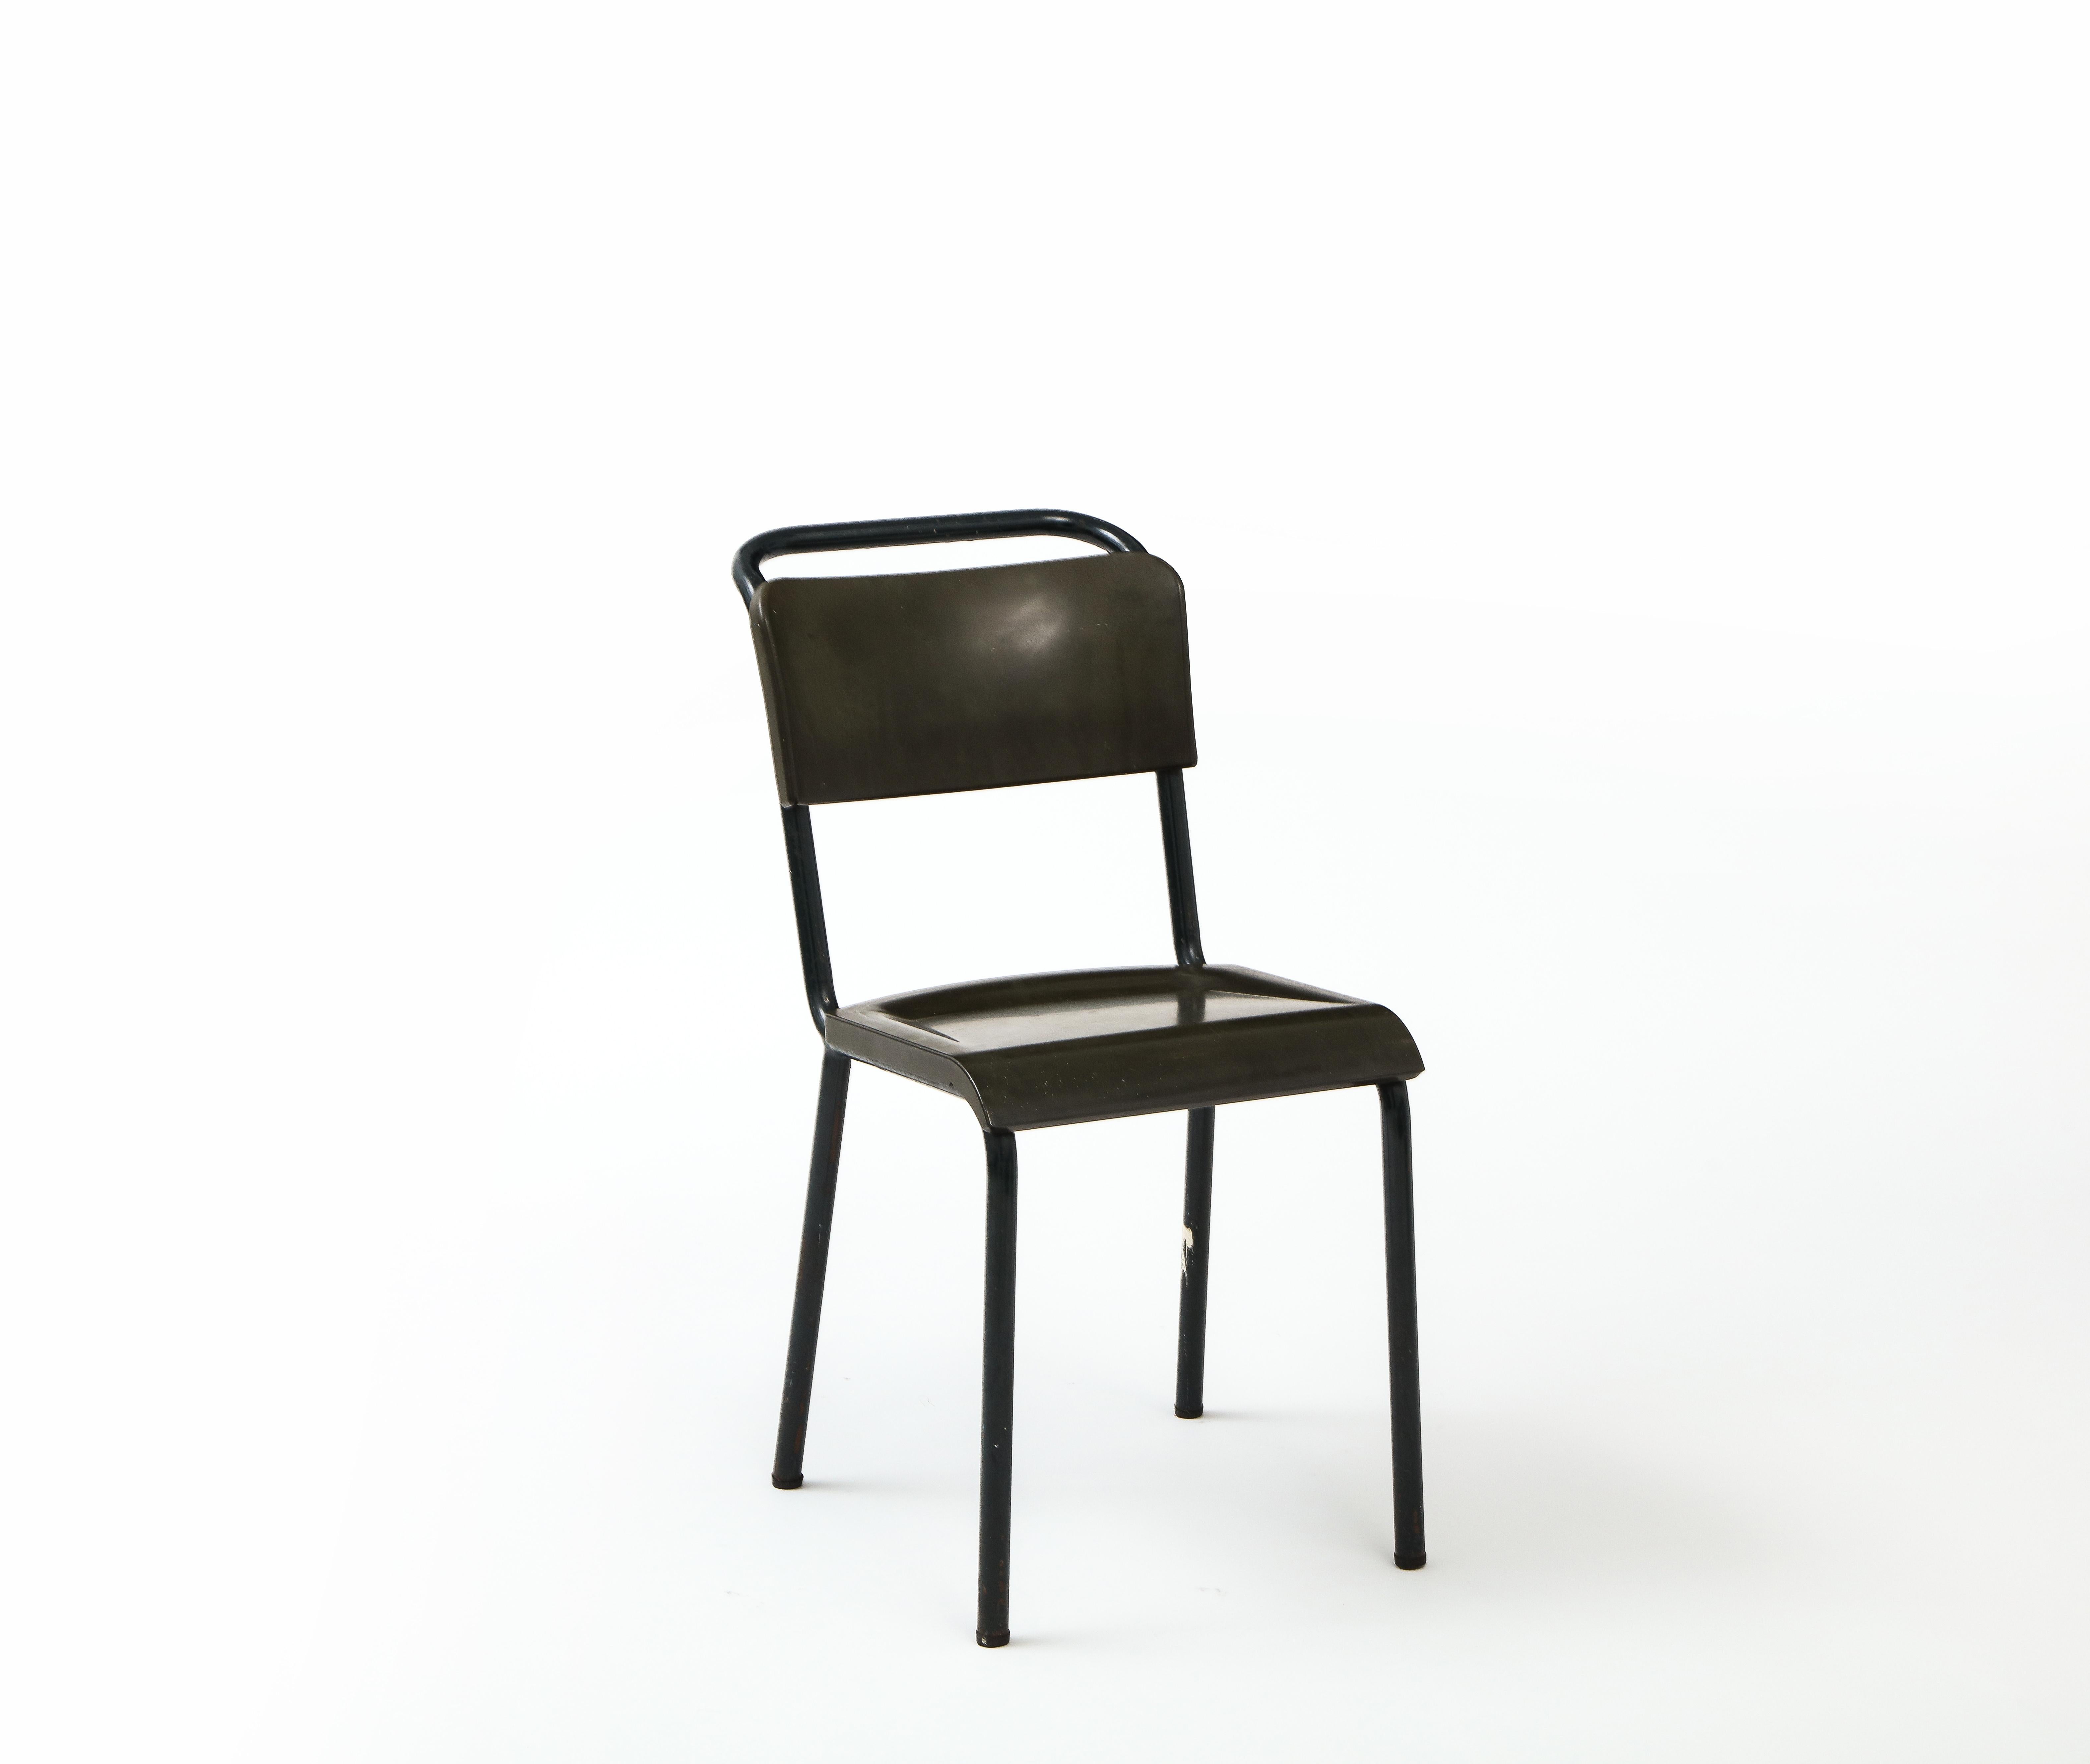 Single Industrial Side Chair in Style of Pierre Guariche, France 1950's For Sale 7